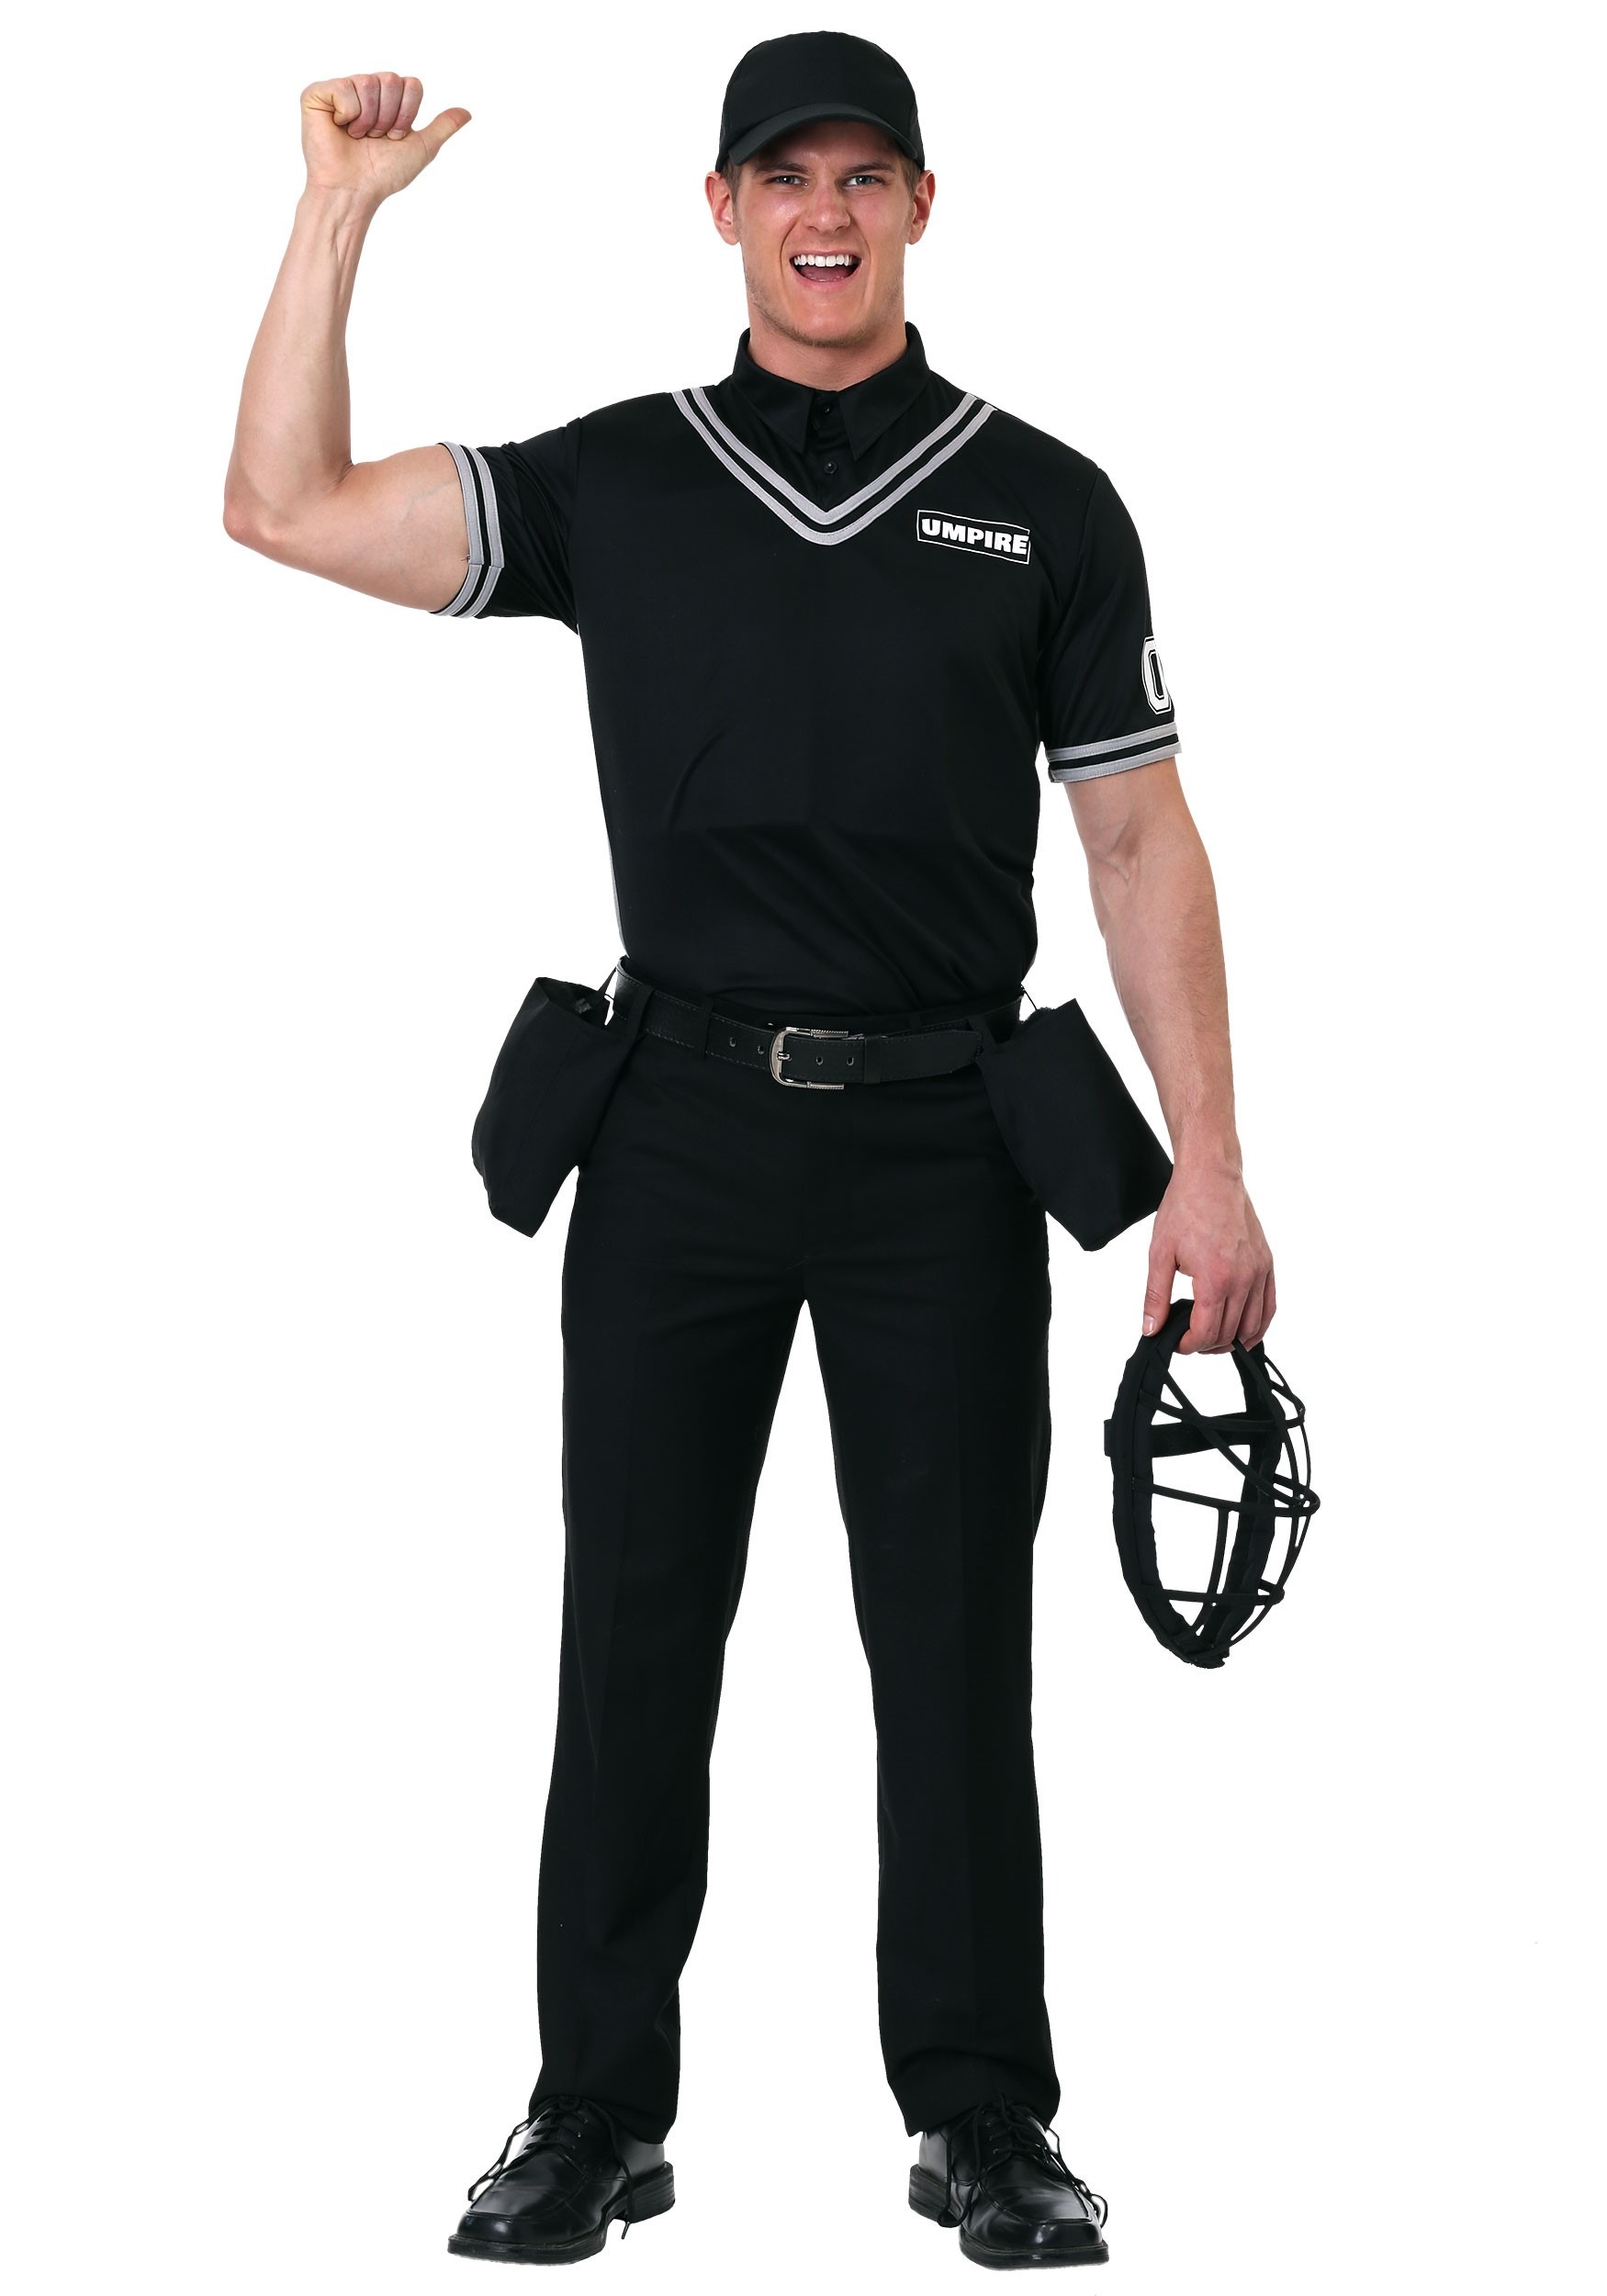 You’re Out Umpire Costume